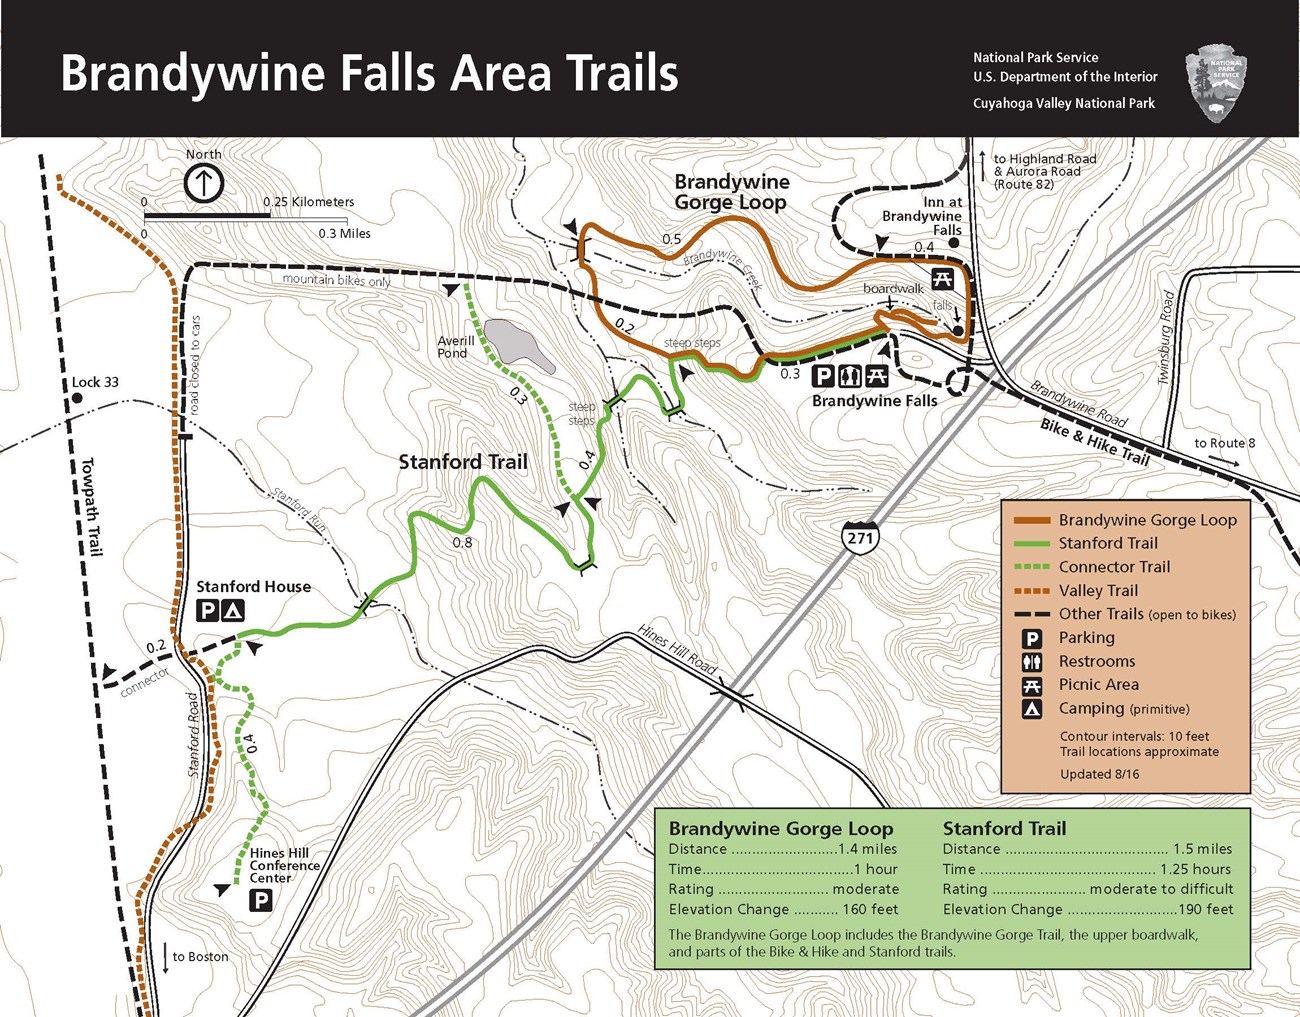 The roads and trails leading to Brandywine Falls. Brandywine Gorge Loop begins at the parking lot, loops 1.4 miles, 160 feet elevation change, steep steps. Stanford Trail from Stanford House, 1.5 miles one way, 190 feet elevation change, steep steps.